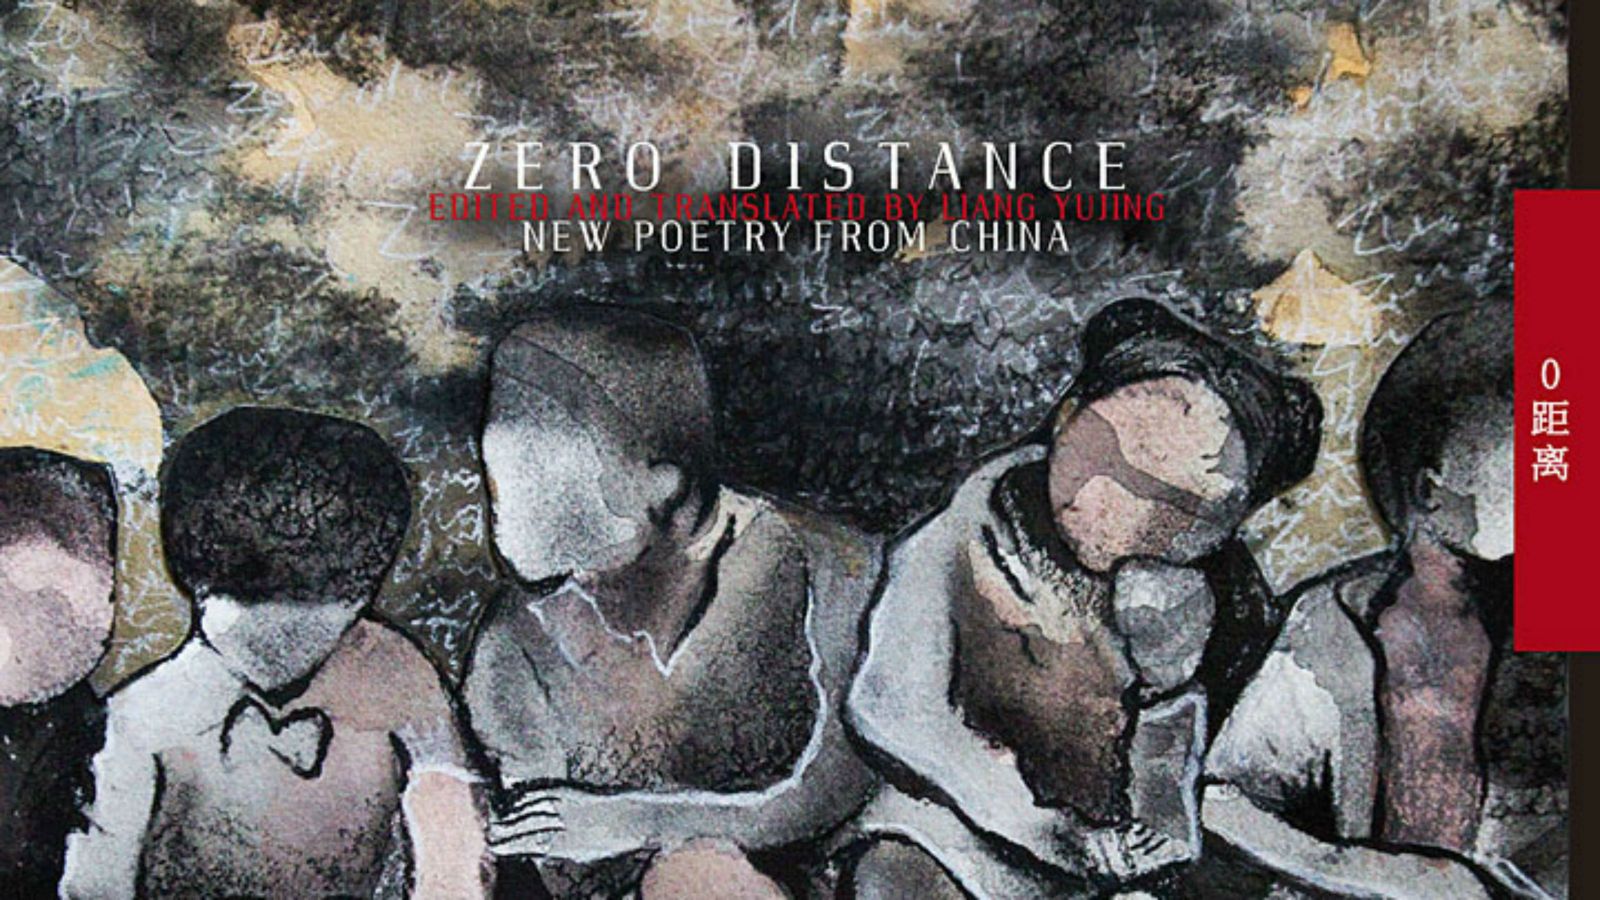 Book cover of Zero Distance, by Liang Yujing.